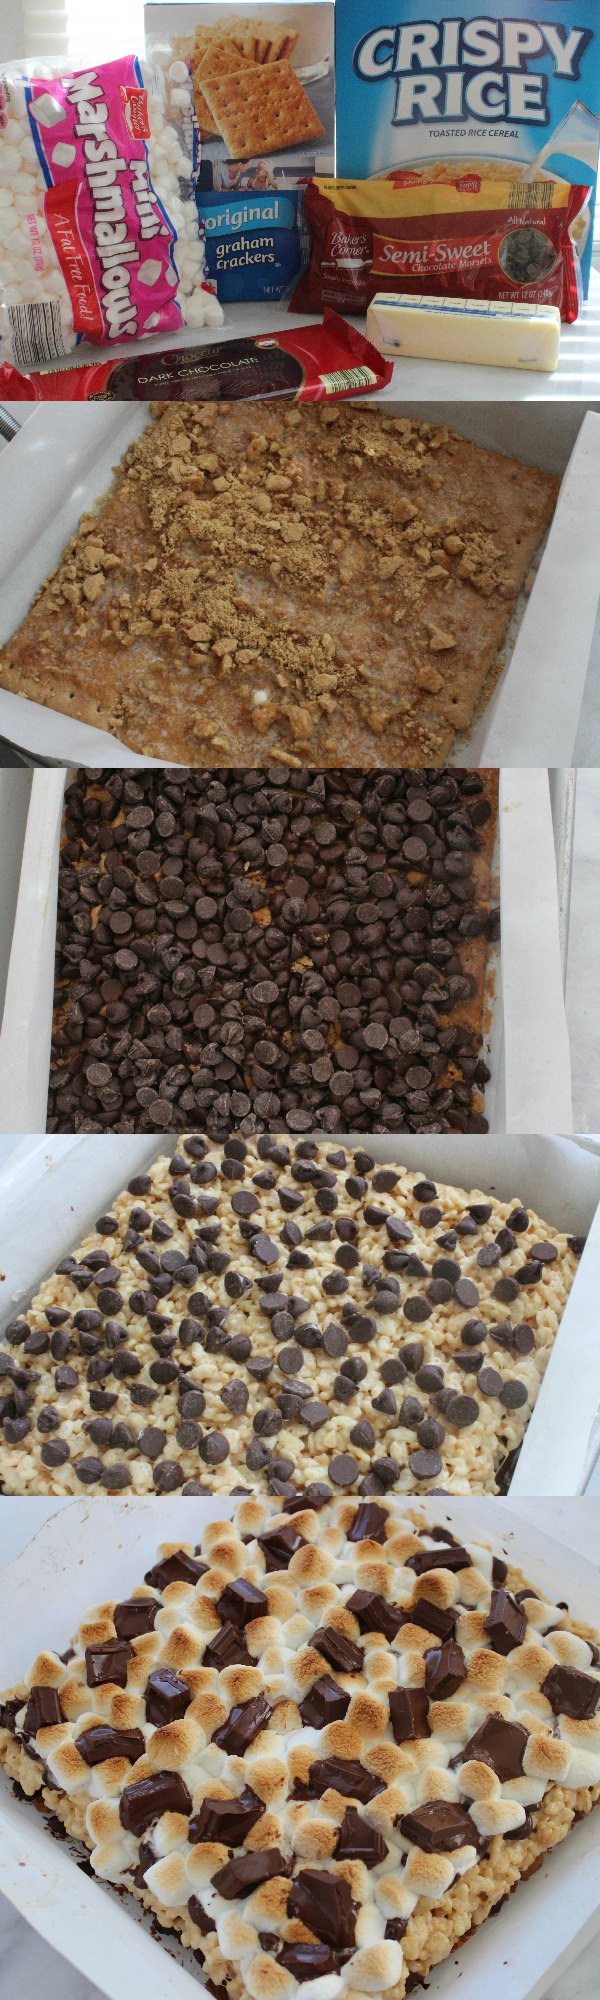 These S’Mores Krispie Treats combines your favorite Rice Krispie Treats cereal with the taste of your favorite classic S’mores recipes for a yummy summertime treat that you and your family are sure to love. Delicious dessert bars full of chocolate that will surely be a hit at your next party!